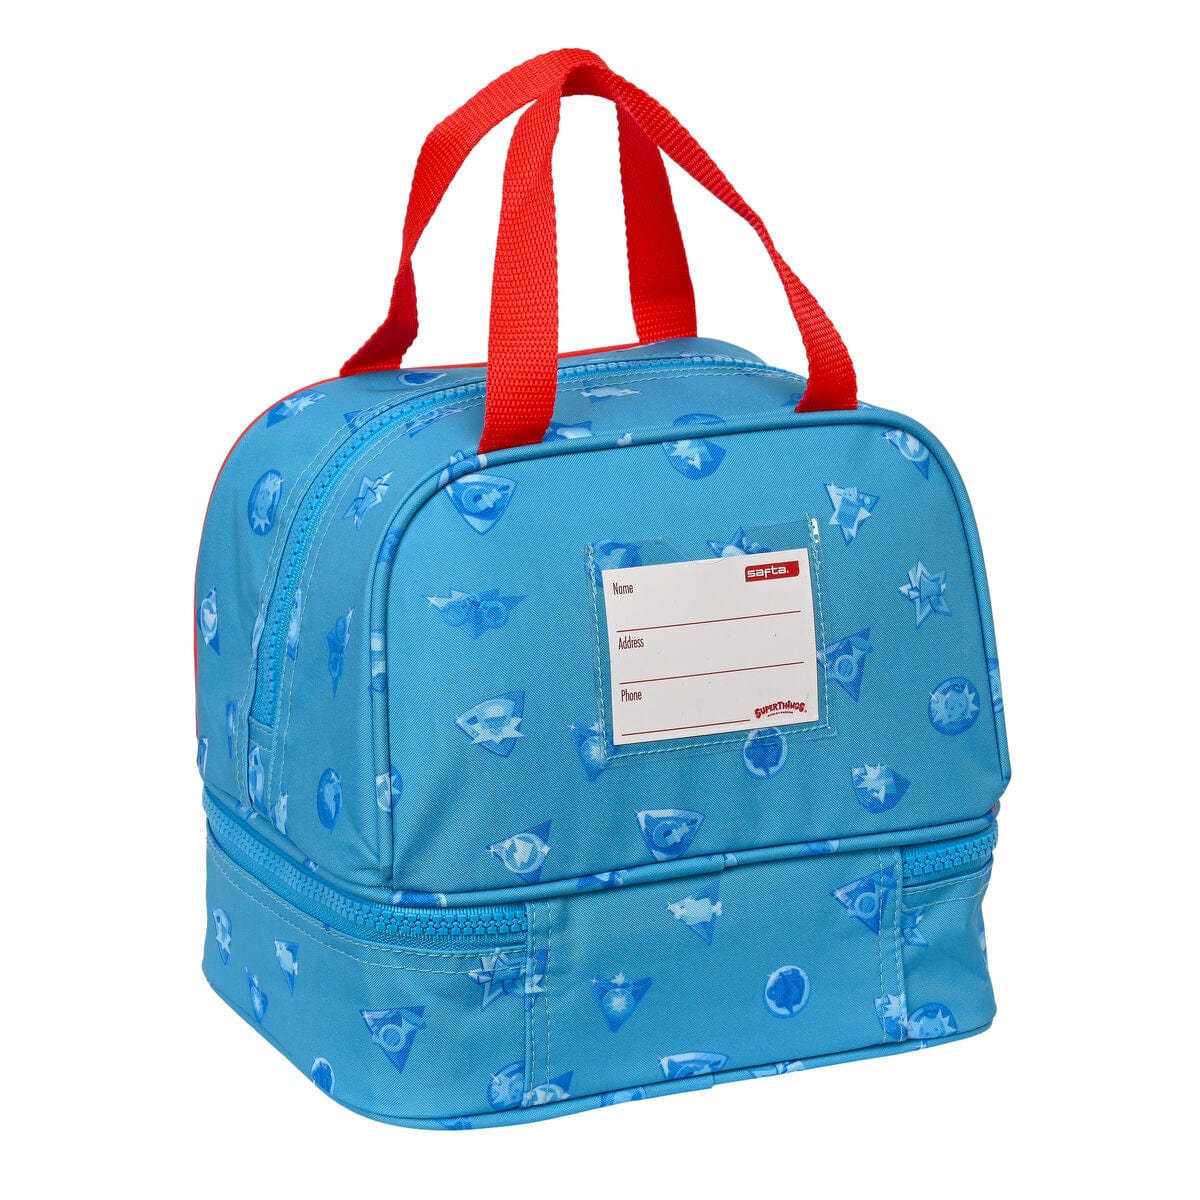 SuperThings Sport | Fitness > Camping und Berge > Tragbare Kühlboxen Lunchbox SuperThings Rescue force Blau 20 x 20 x 15 cm